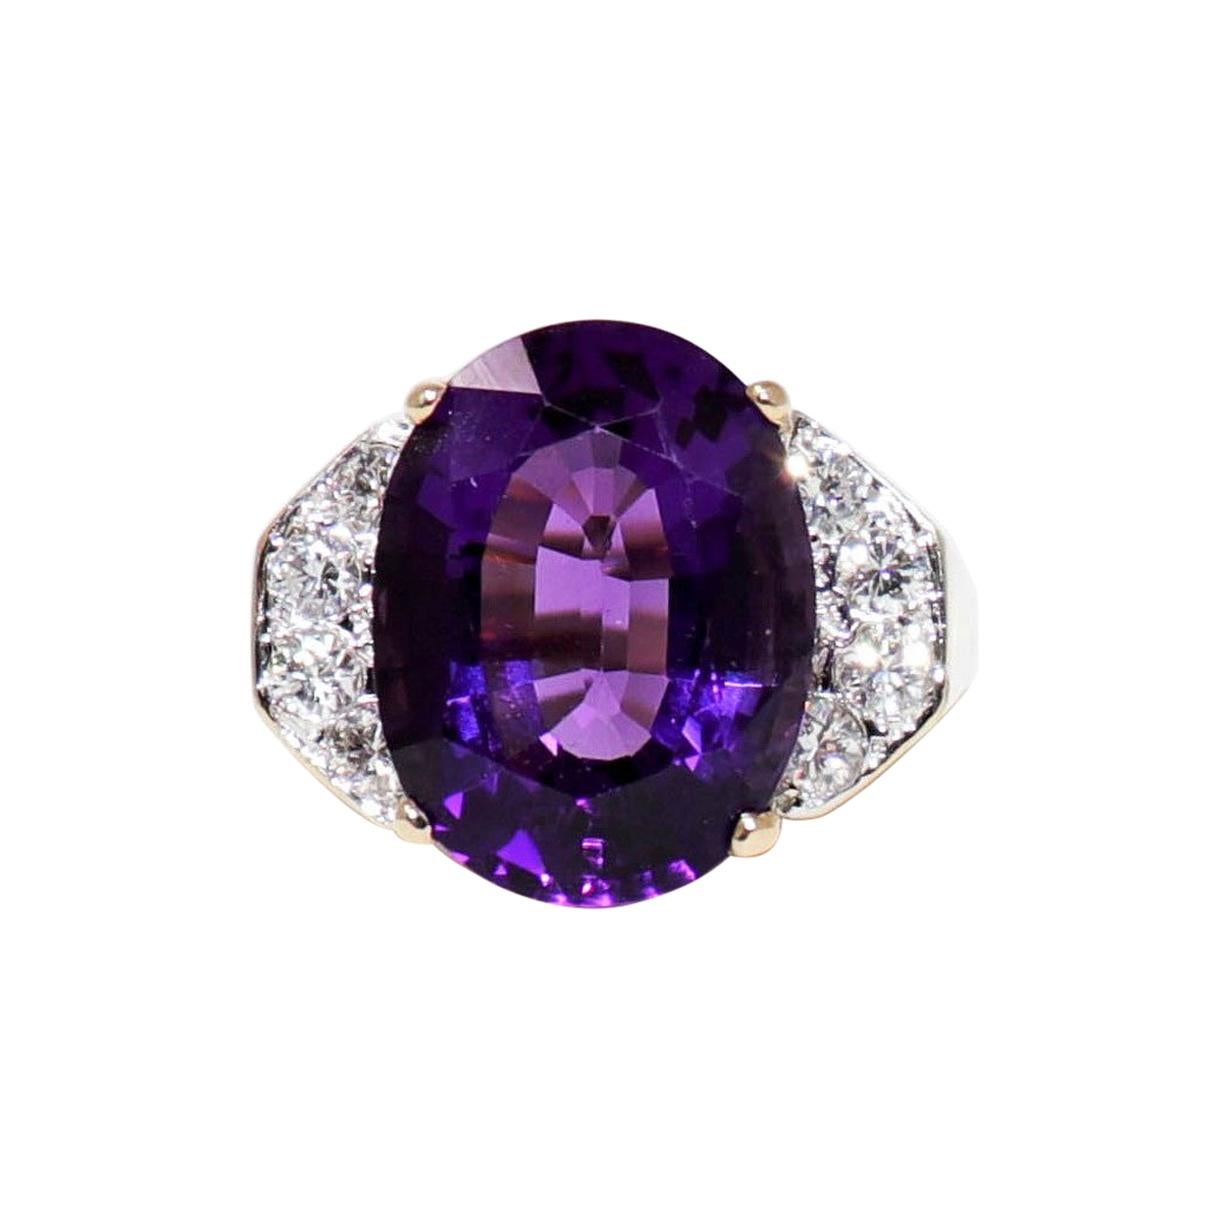 Oval Amethyst and Diamond Accent Cocktail Ring 14 Karat Gold 8.91 Carats Total